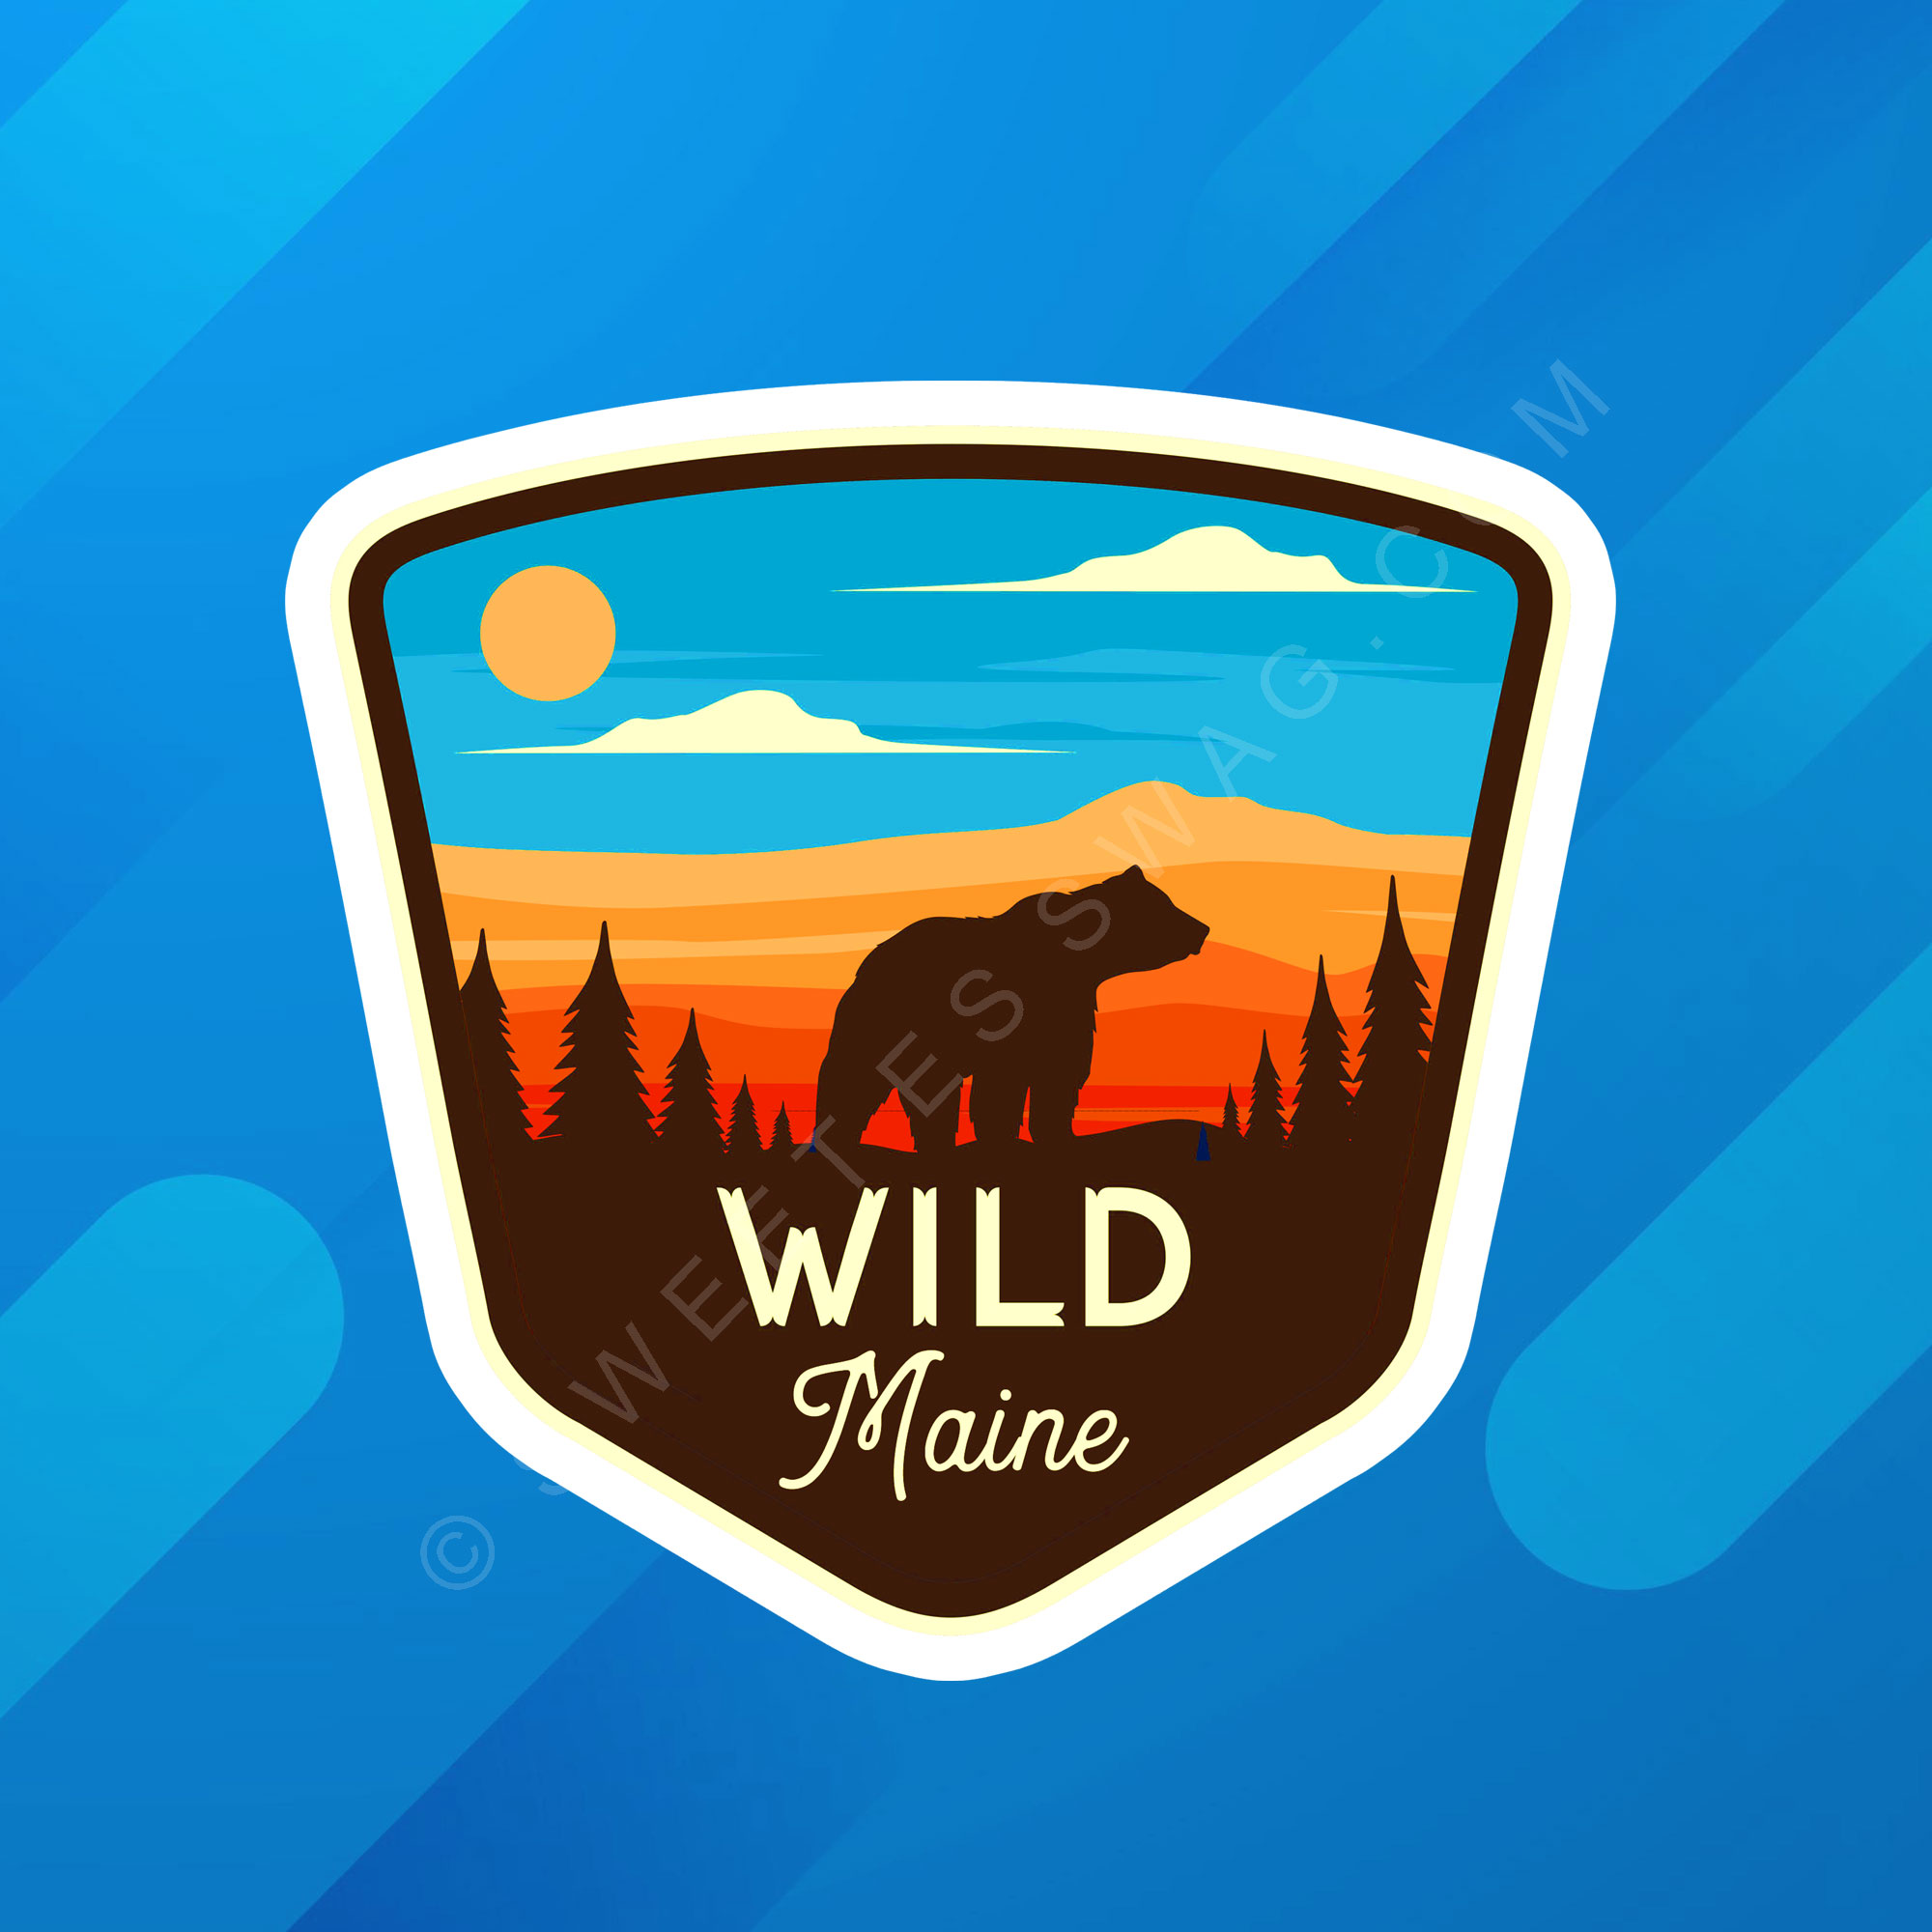 Wild Maine Outdoors Laptop Water Bottle Stickers